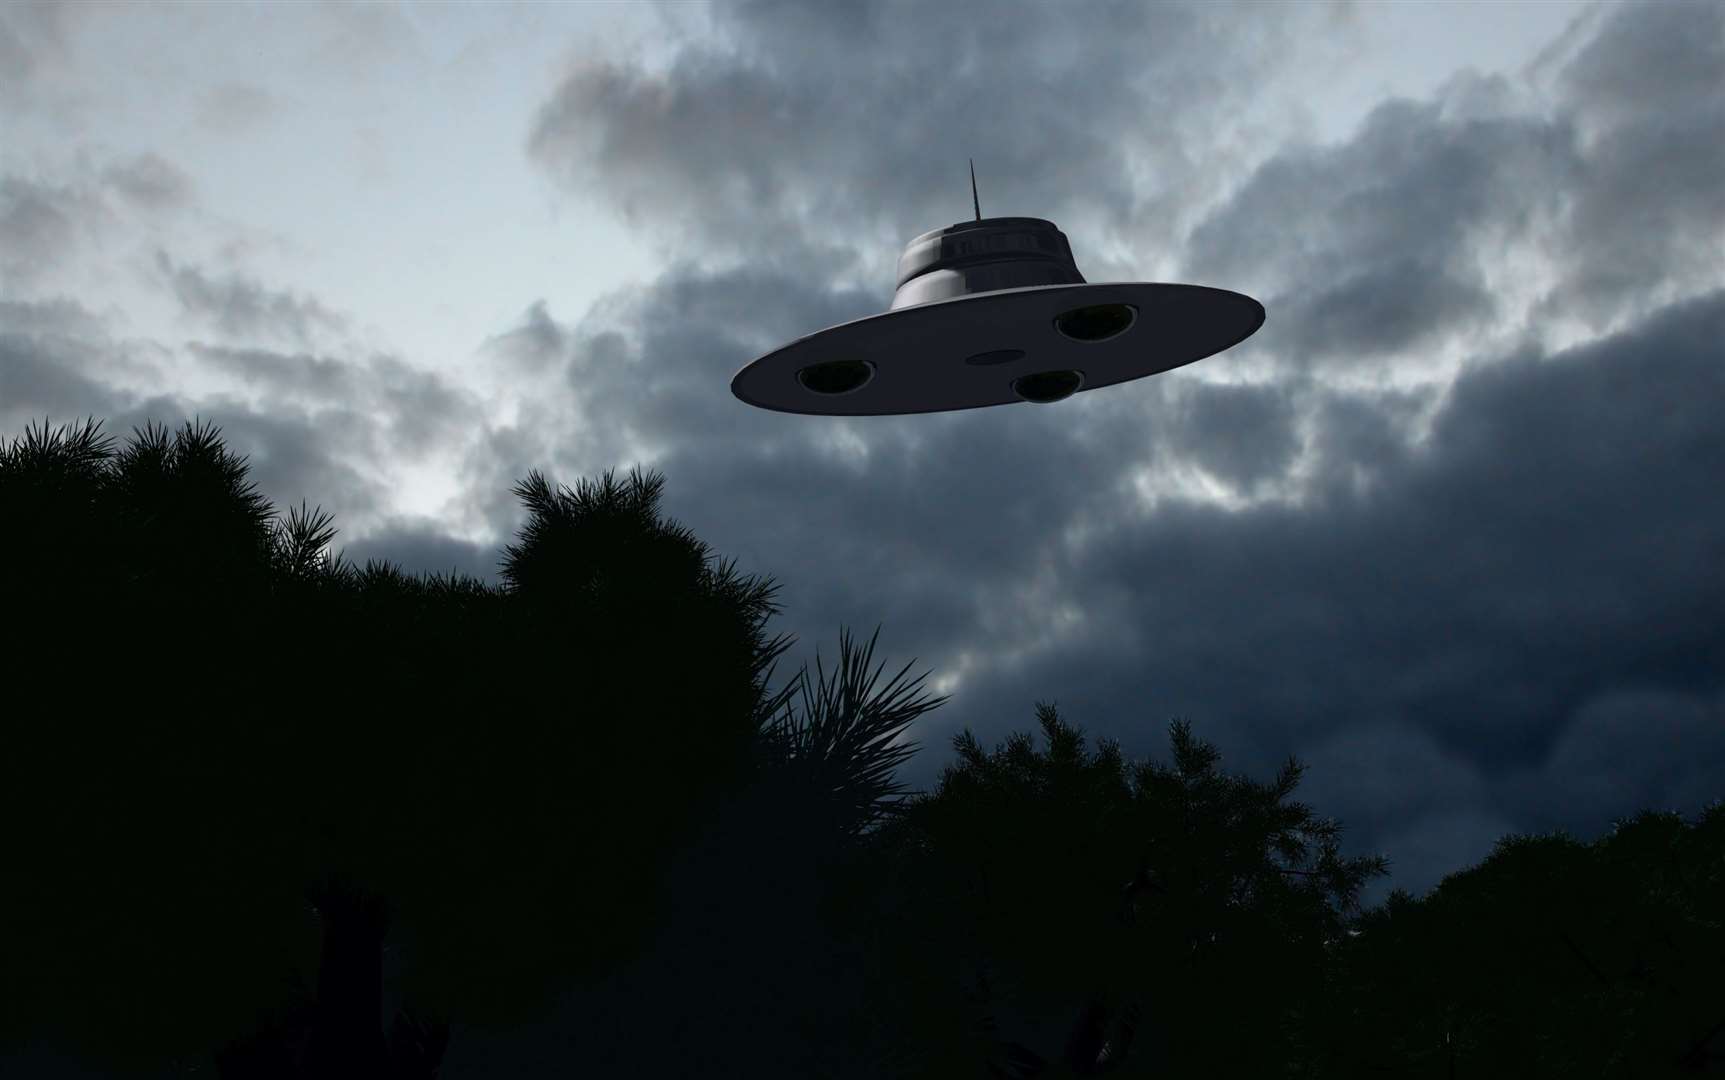 Kent had a high number of apparent UFO sightings